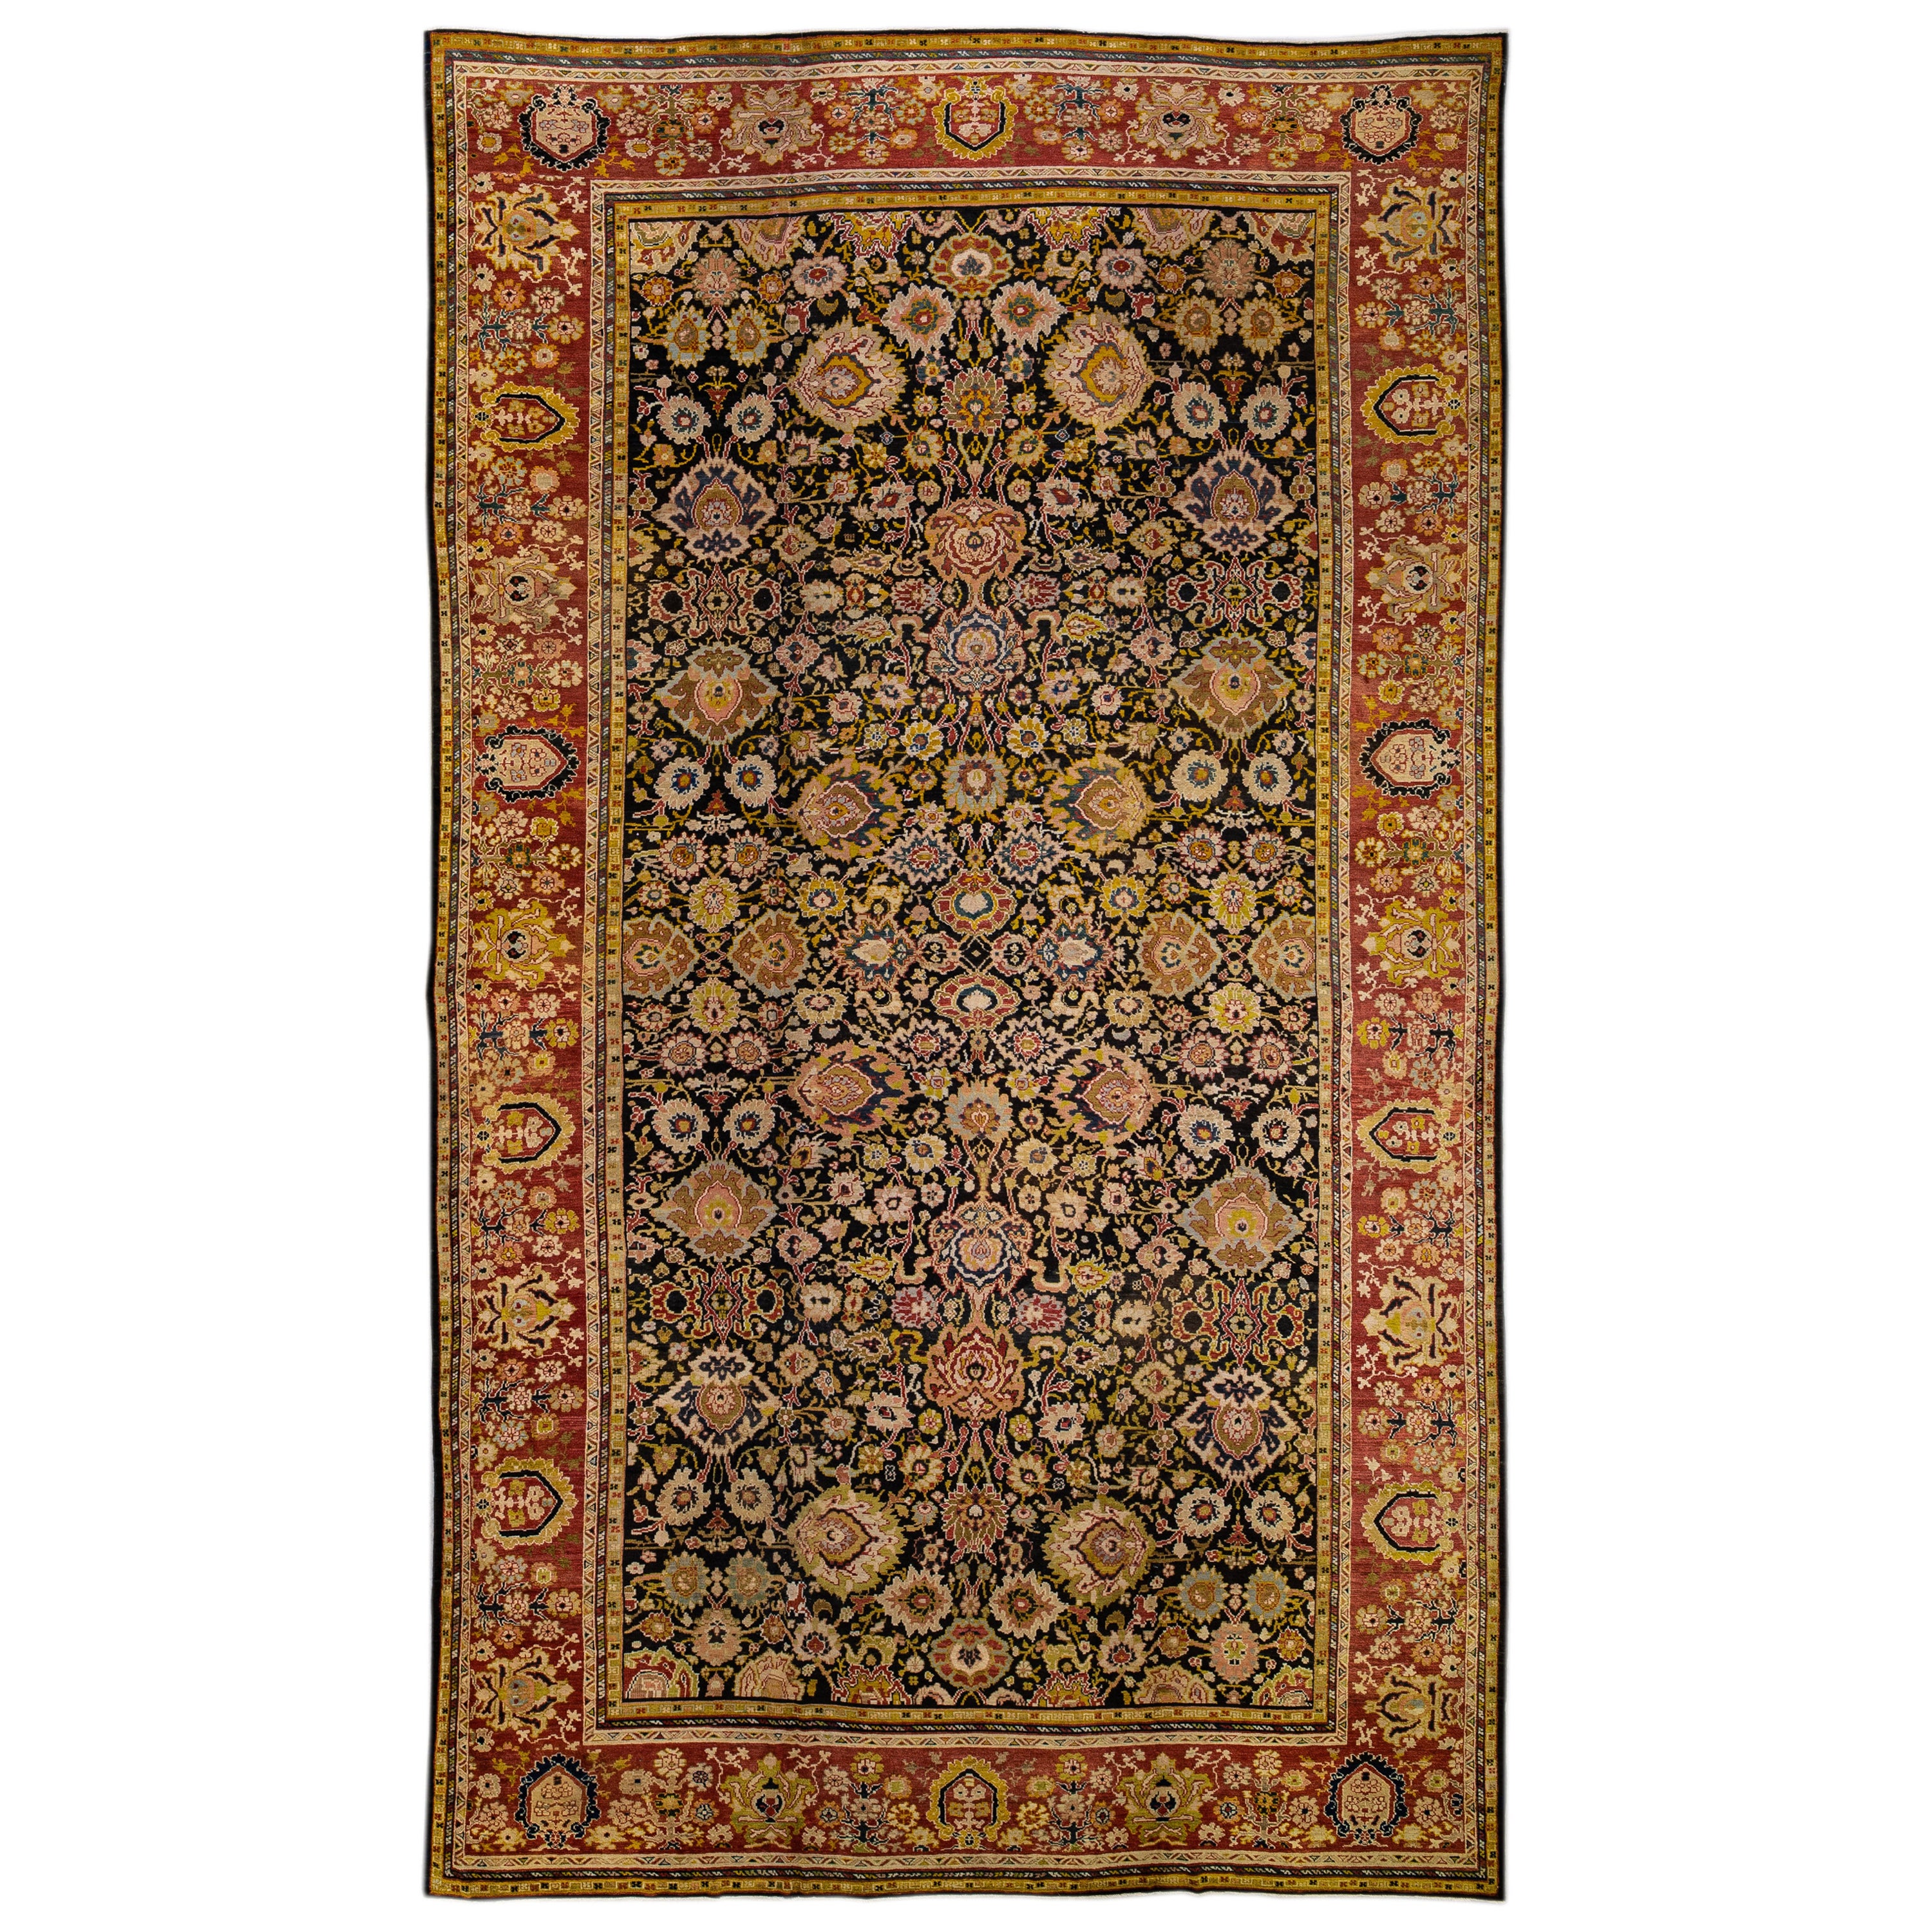 19th Century Antique Sultanabad Handmade Allover Floral Oversize Wool Rug